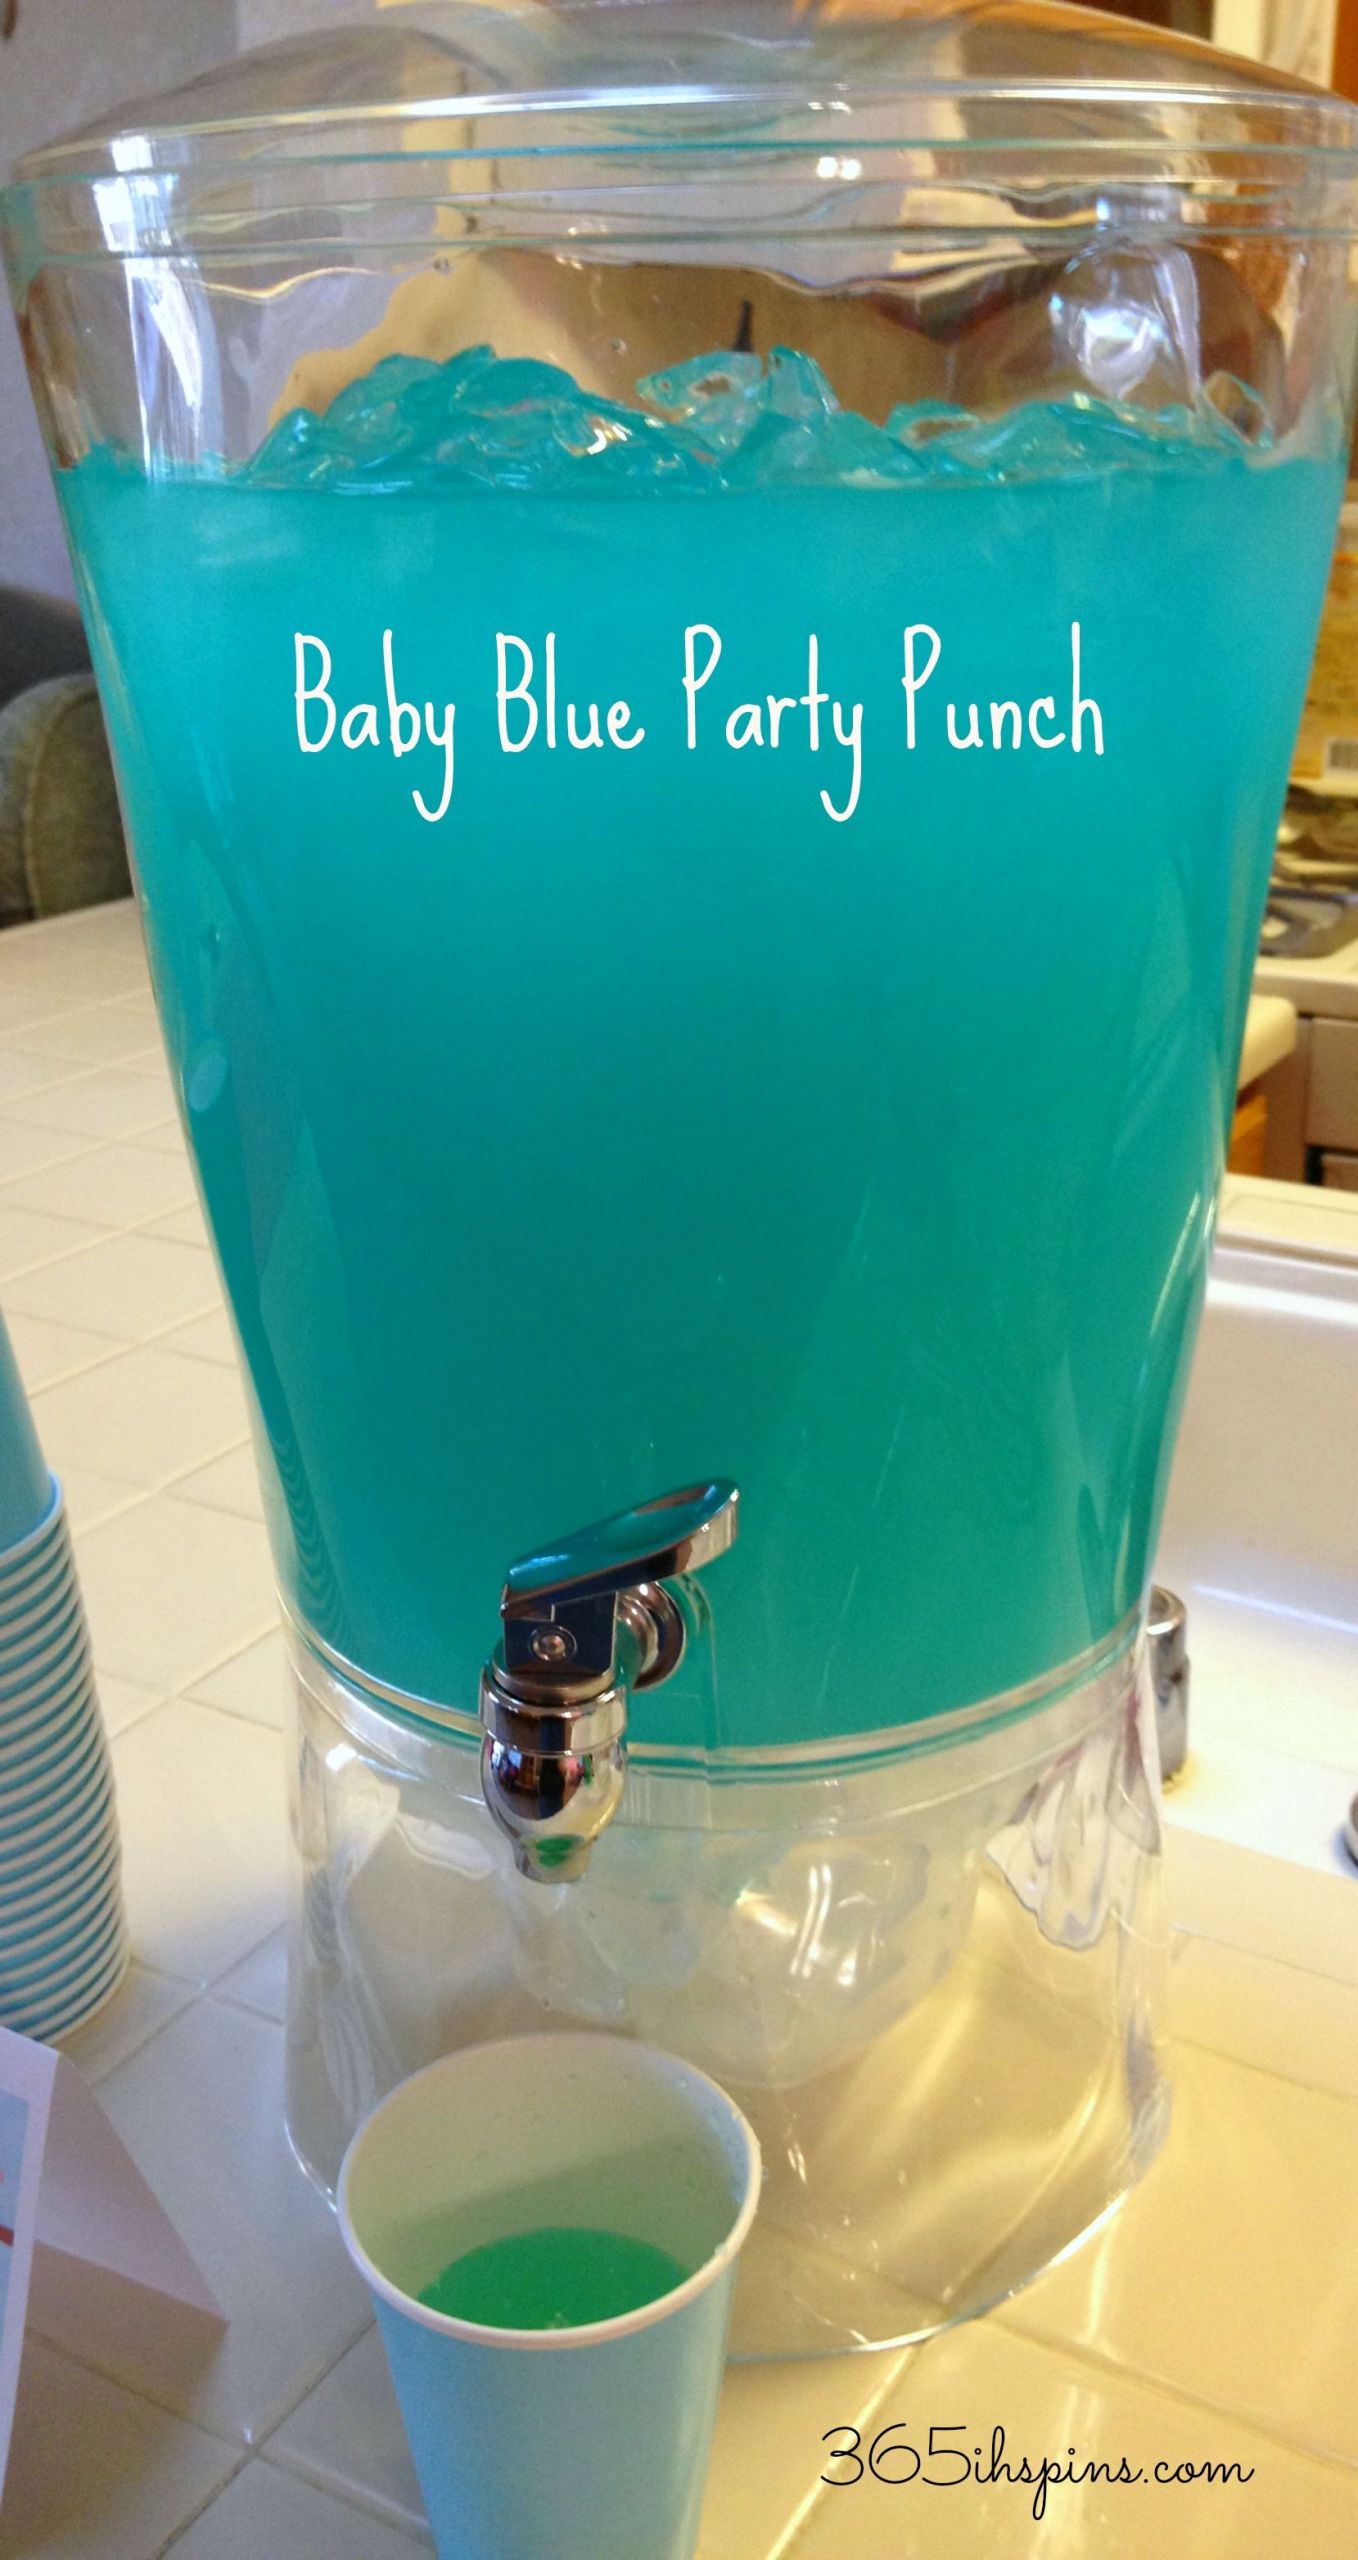 Blue Hawaiian Punch Recipes For Baby Showers
 Blue Punch For Baby Shower